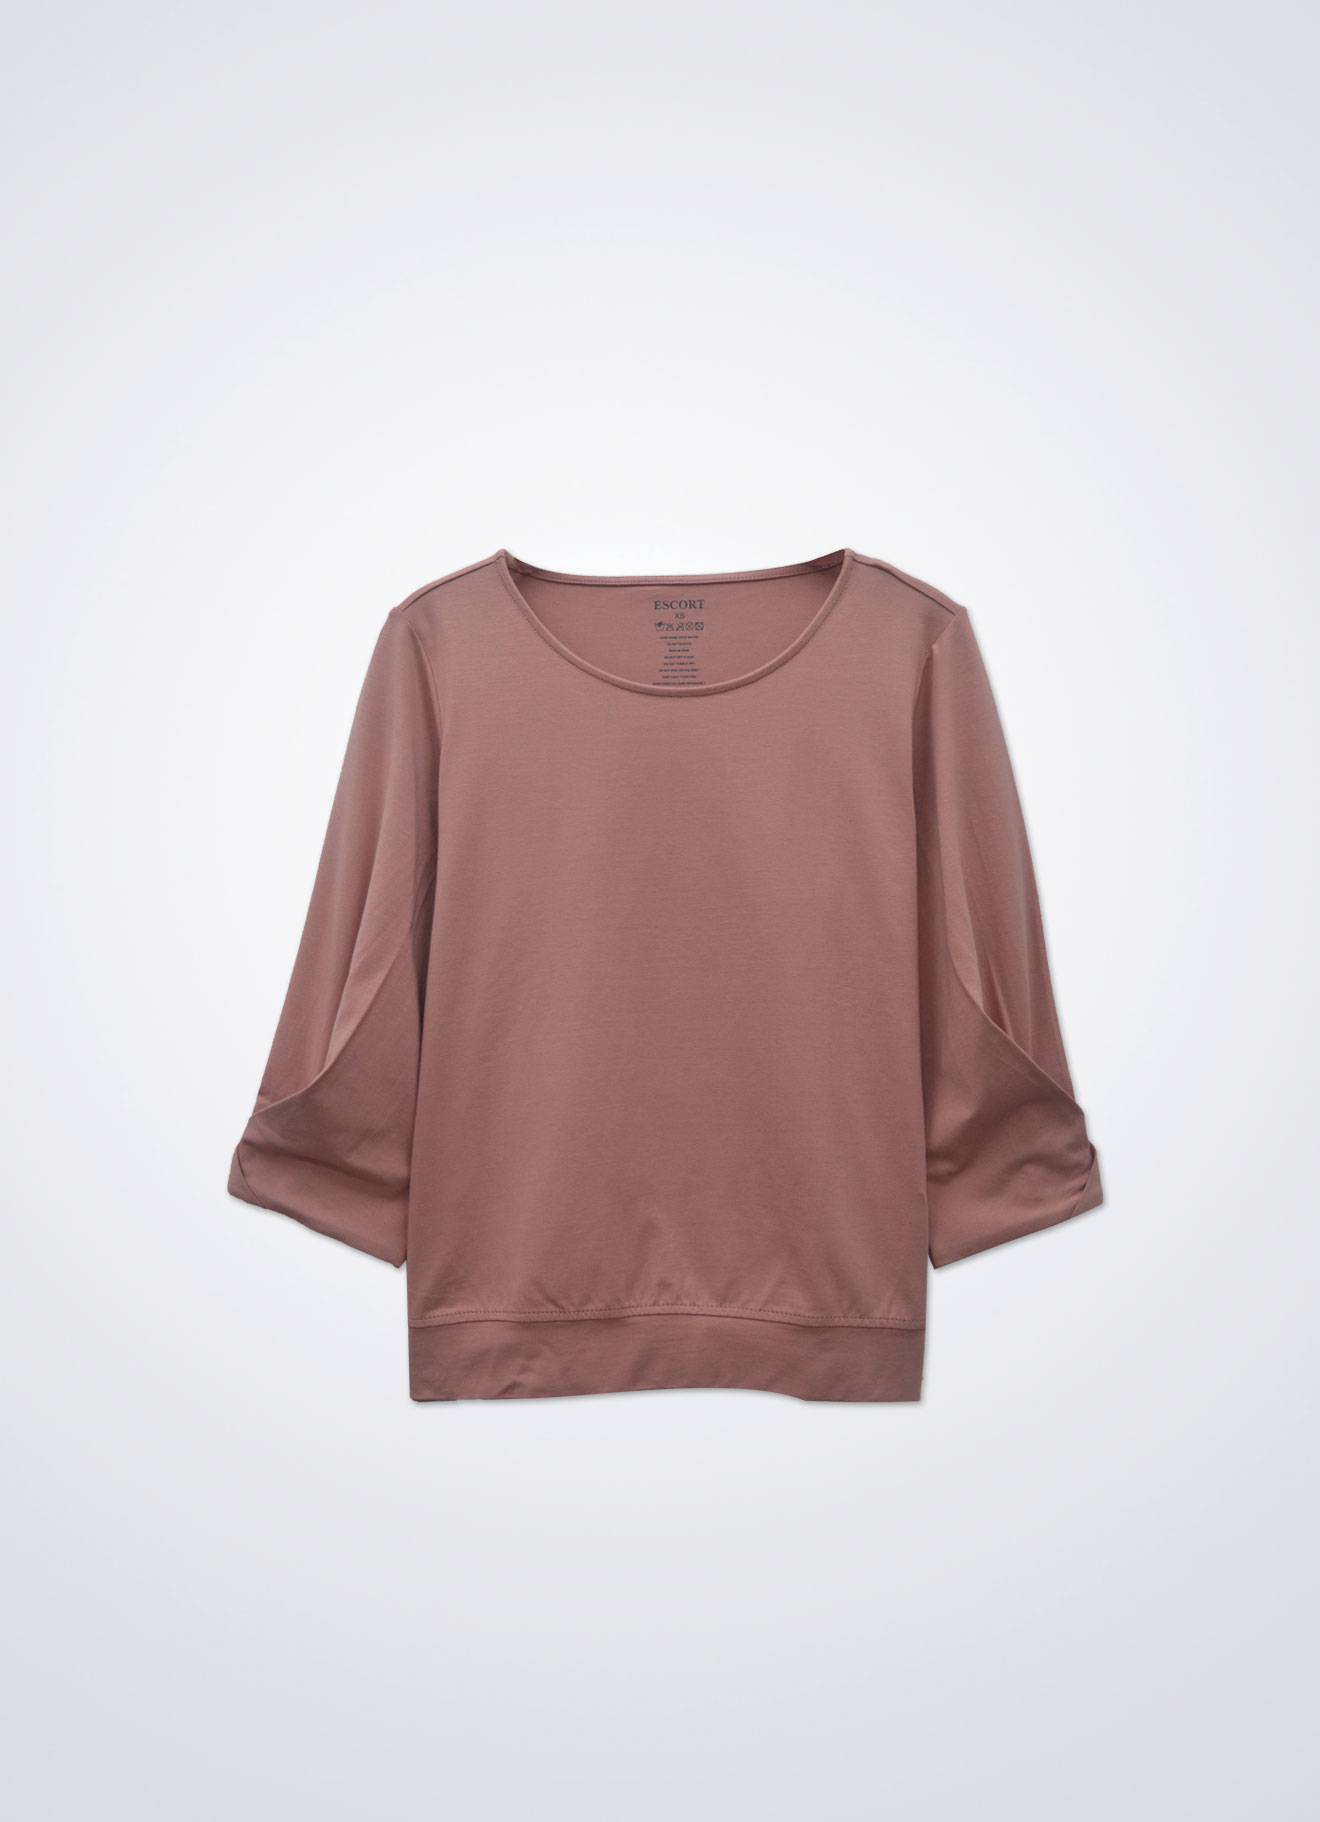 Muted-Clay by Sleeve Top